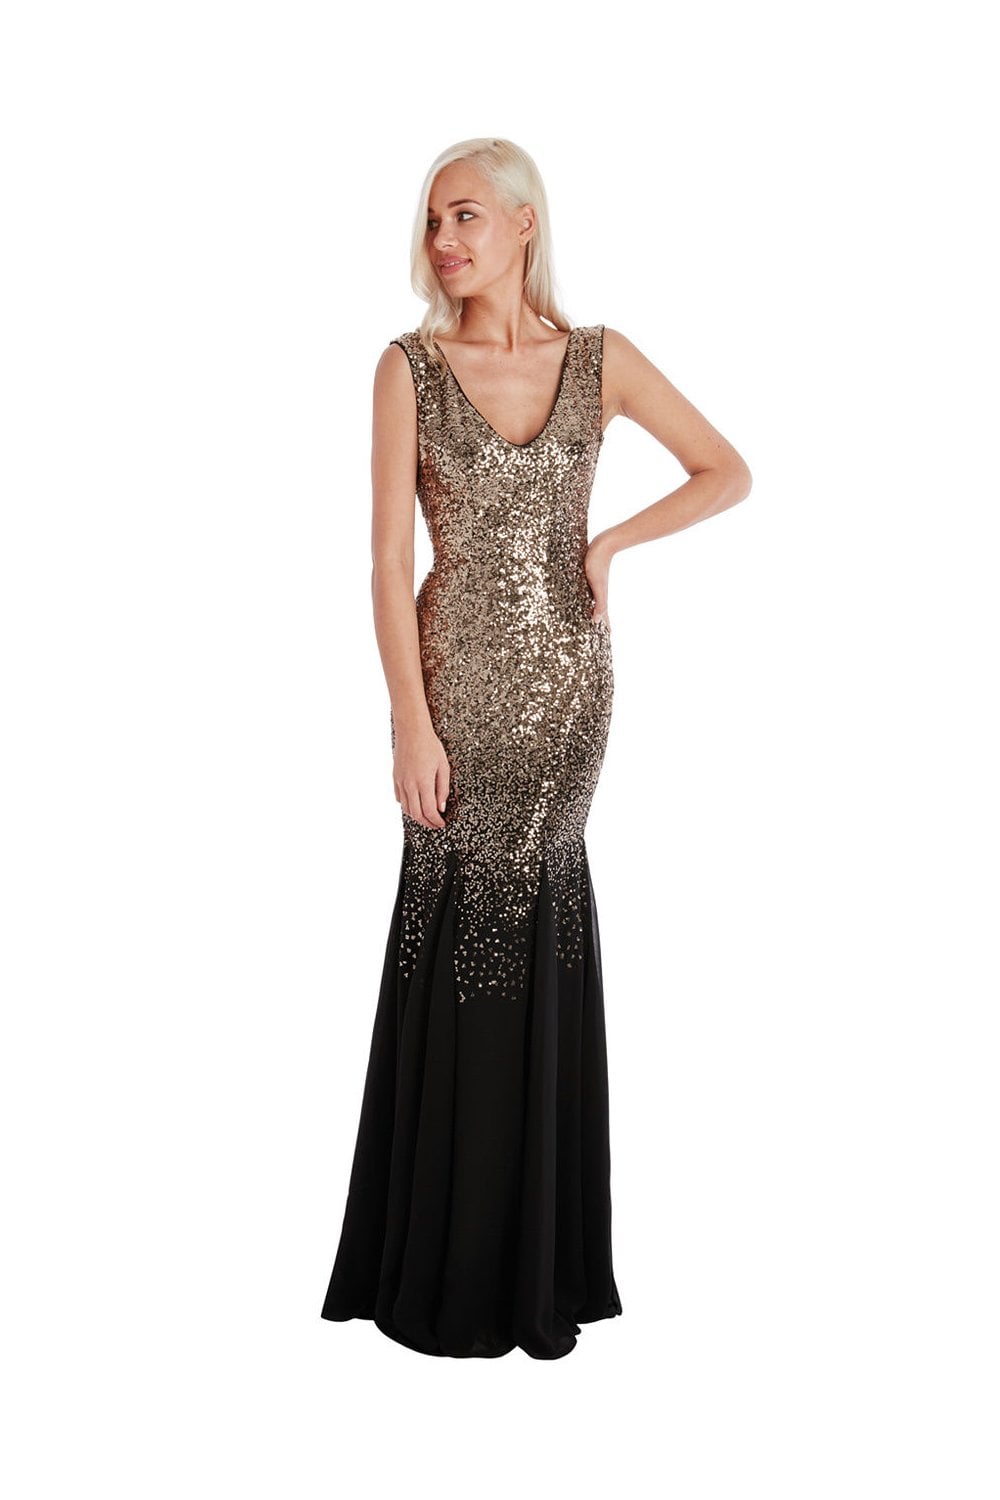 Gold Black Sequin Maxi Party Prom Dress with Chiffon Inserts